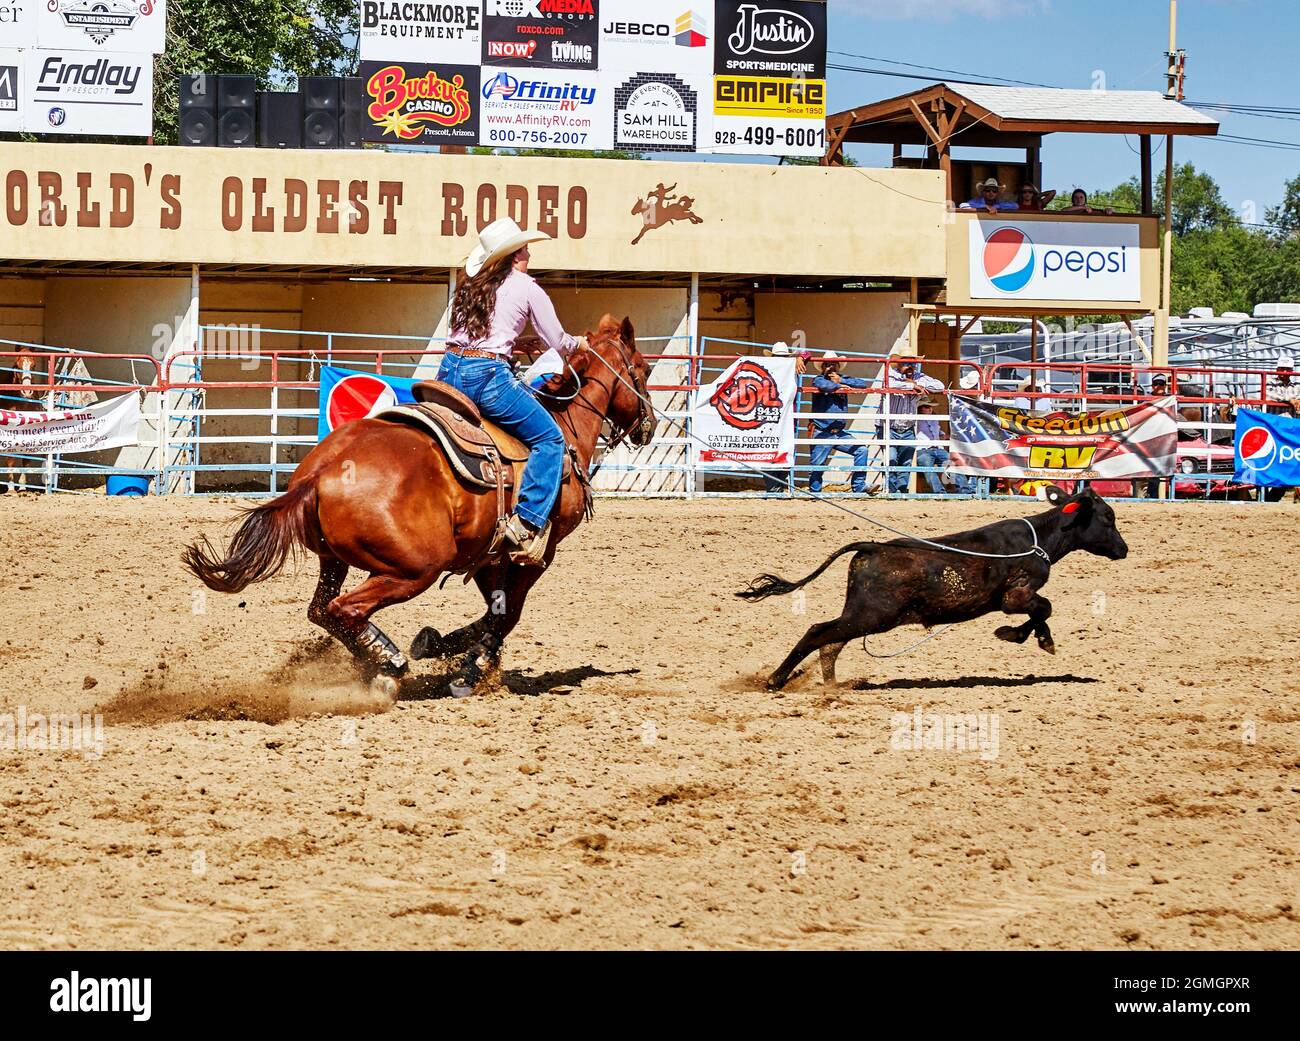 Prescott, Arizona, USA - September 12, 2021: Cowgirl roping a calf at the rodeo competition held at the Prescott Rodeo Fair grounds during the Yavapai Stock Photo